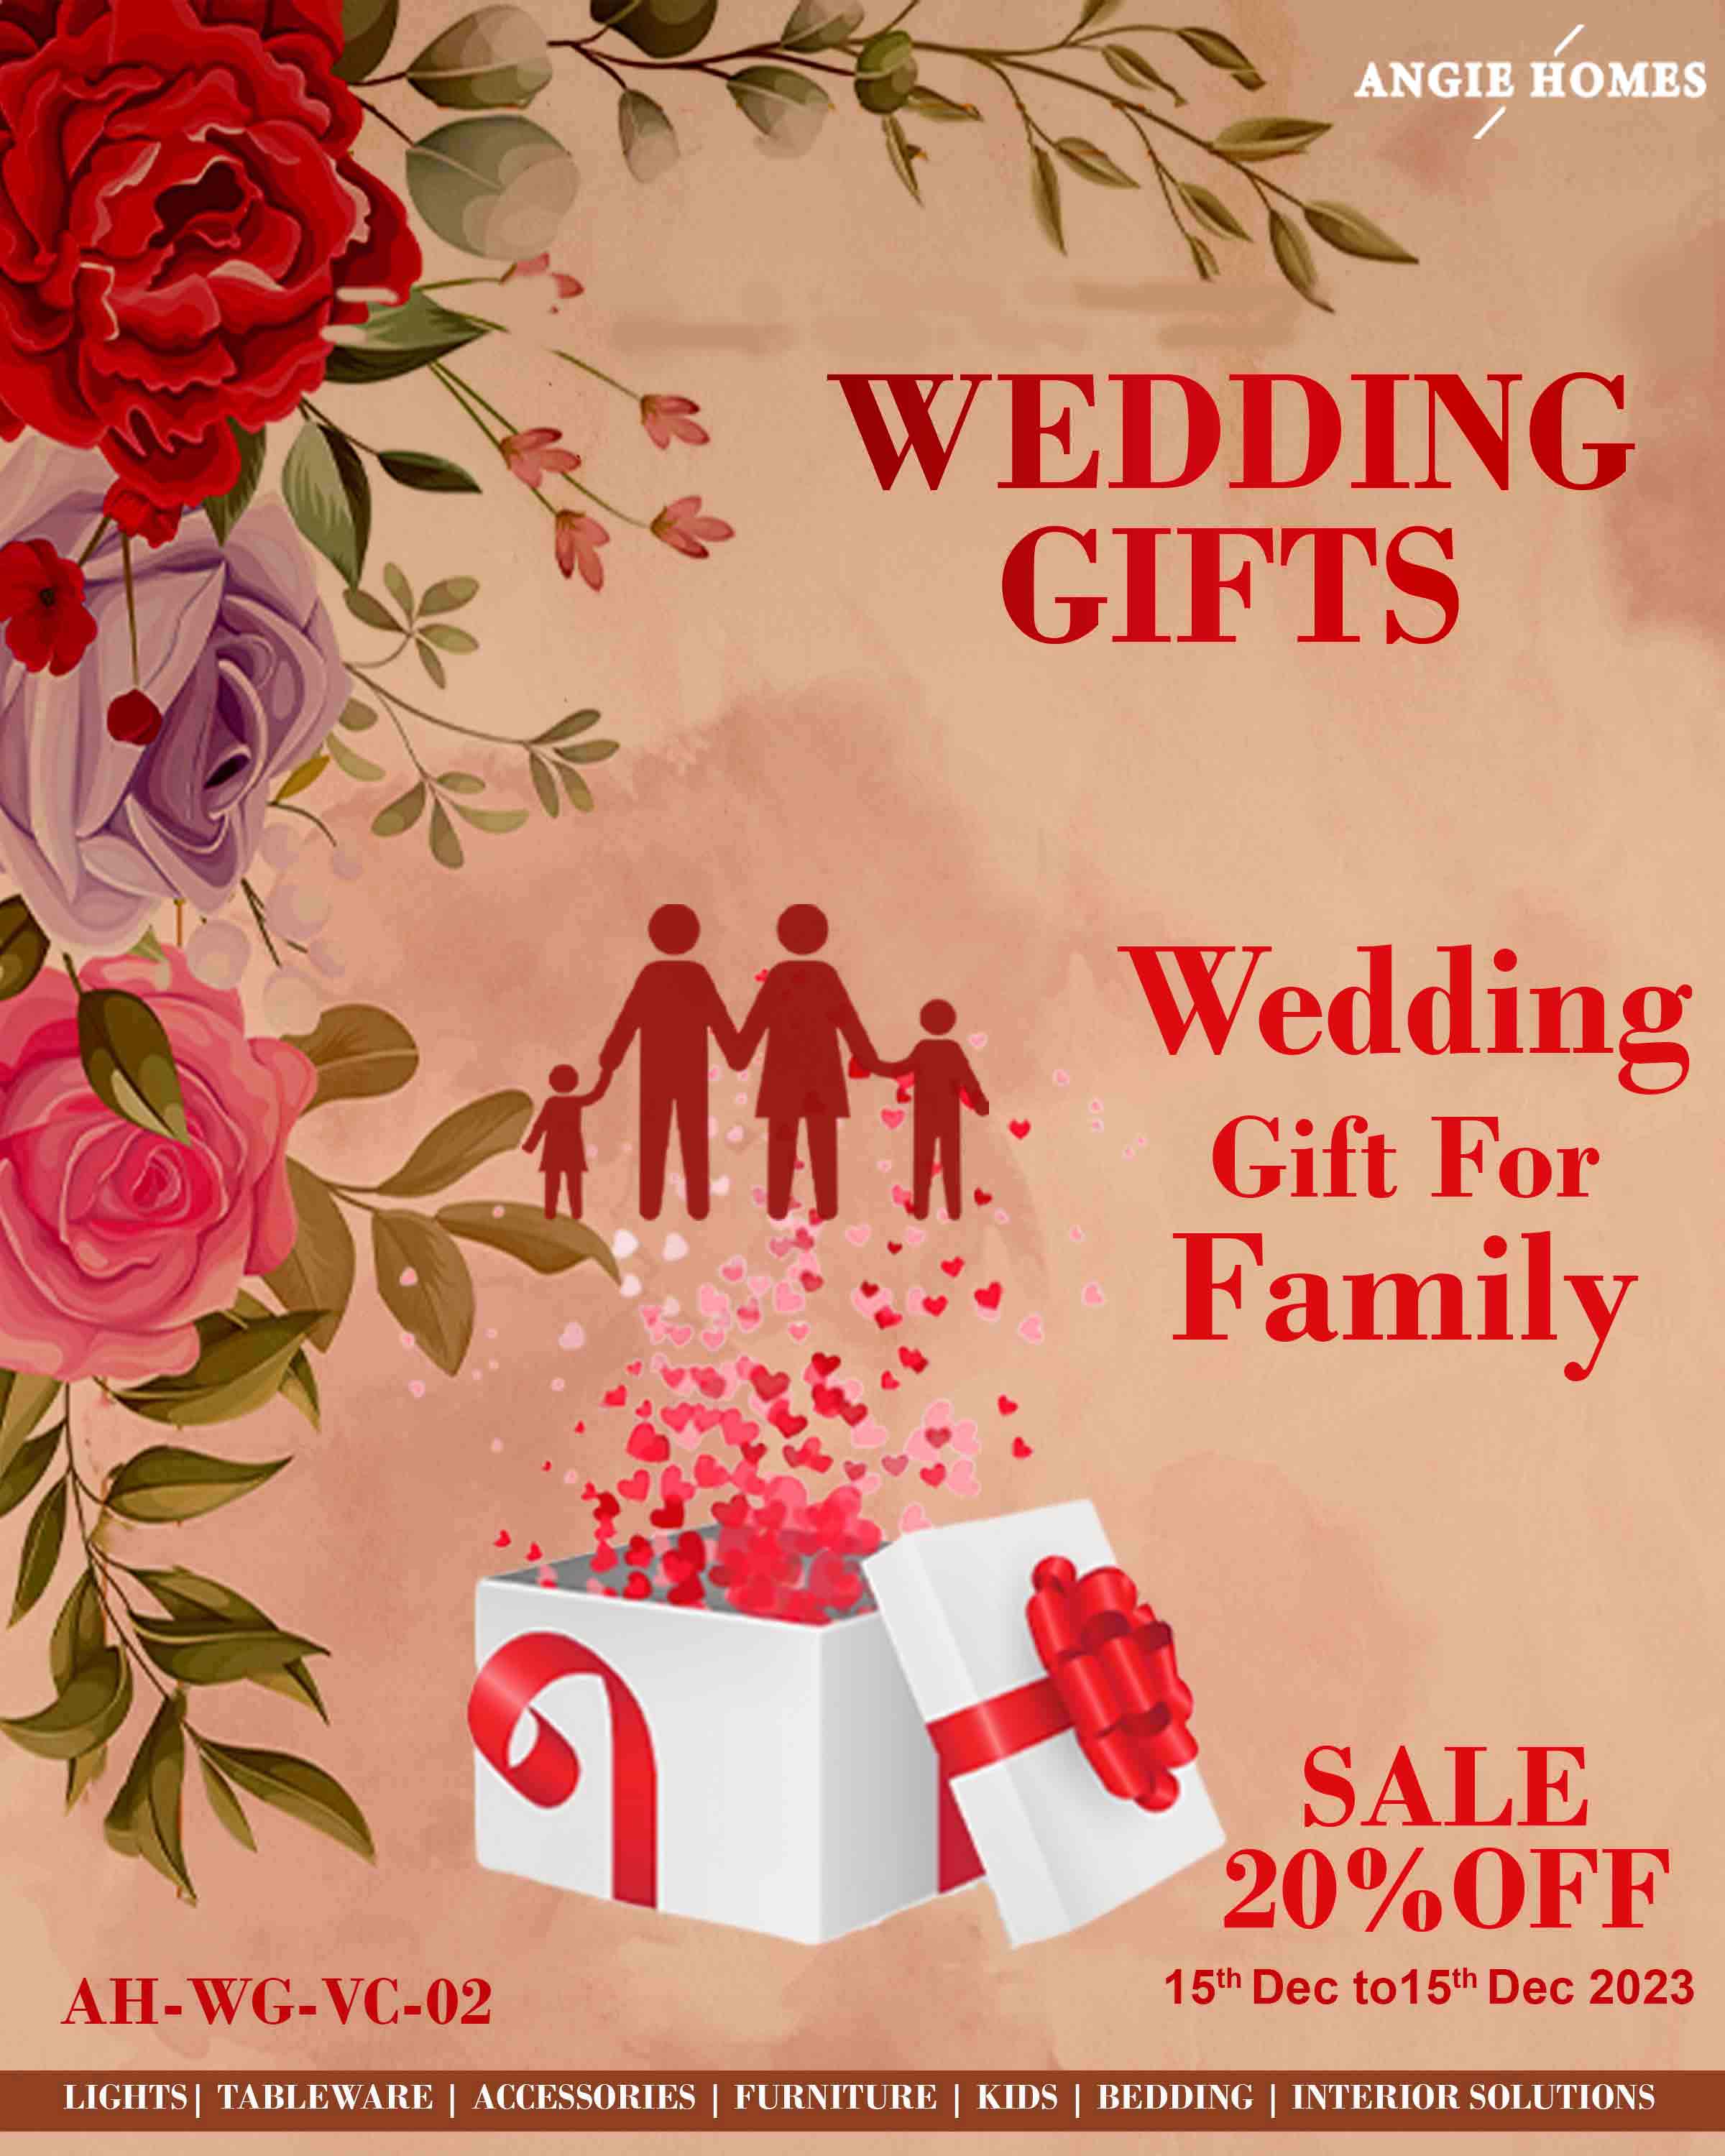 WEDDING GIFTS FOR FAMILY | MARRIAGE GIFT VOUCHER | GIFTTING CARD ANGIE HOMES